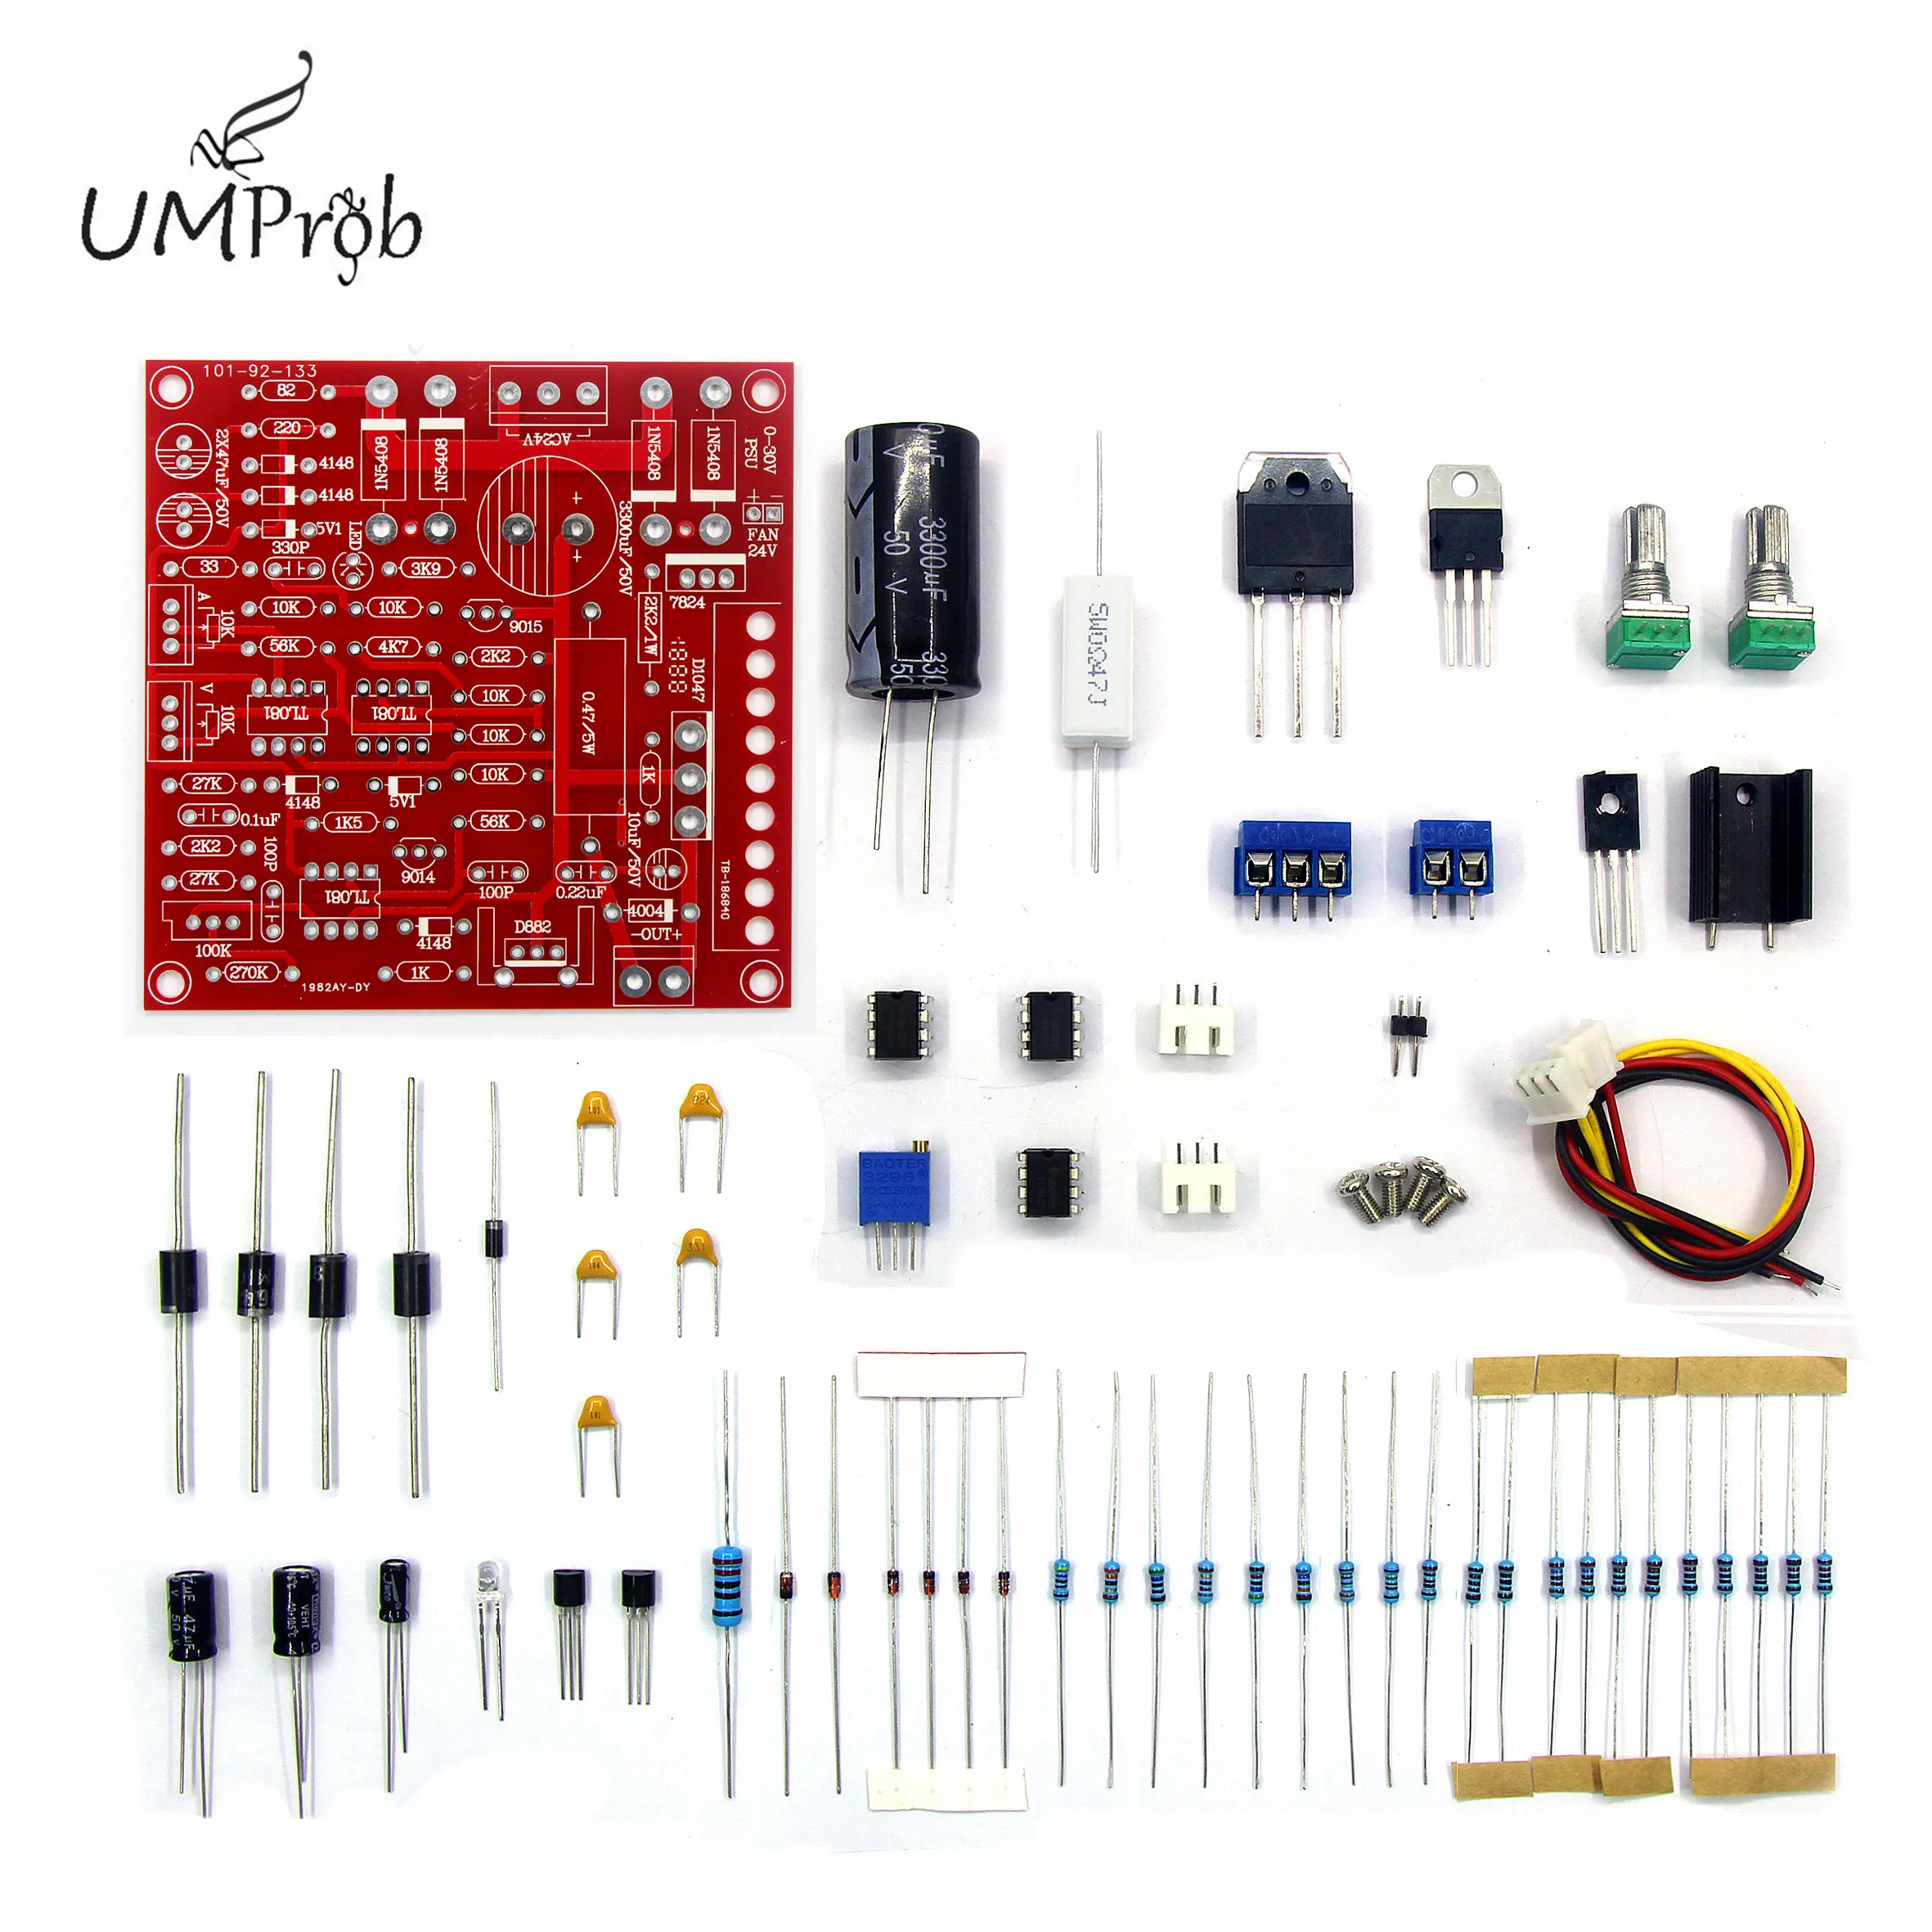 0-30V 2mA-3A Regulated Power Kit Continuously Adjust Current Limiting Protect HN 